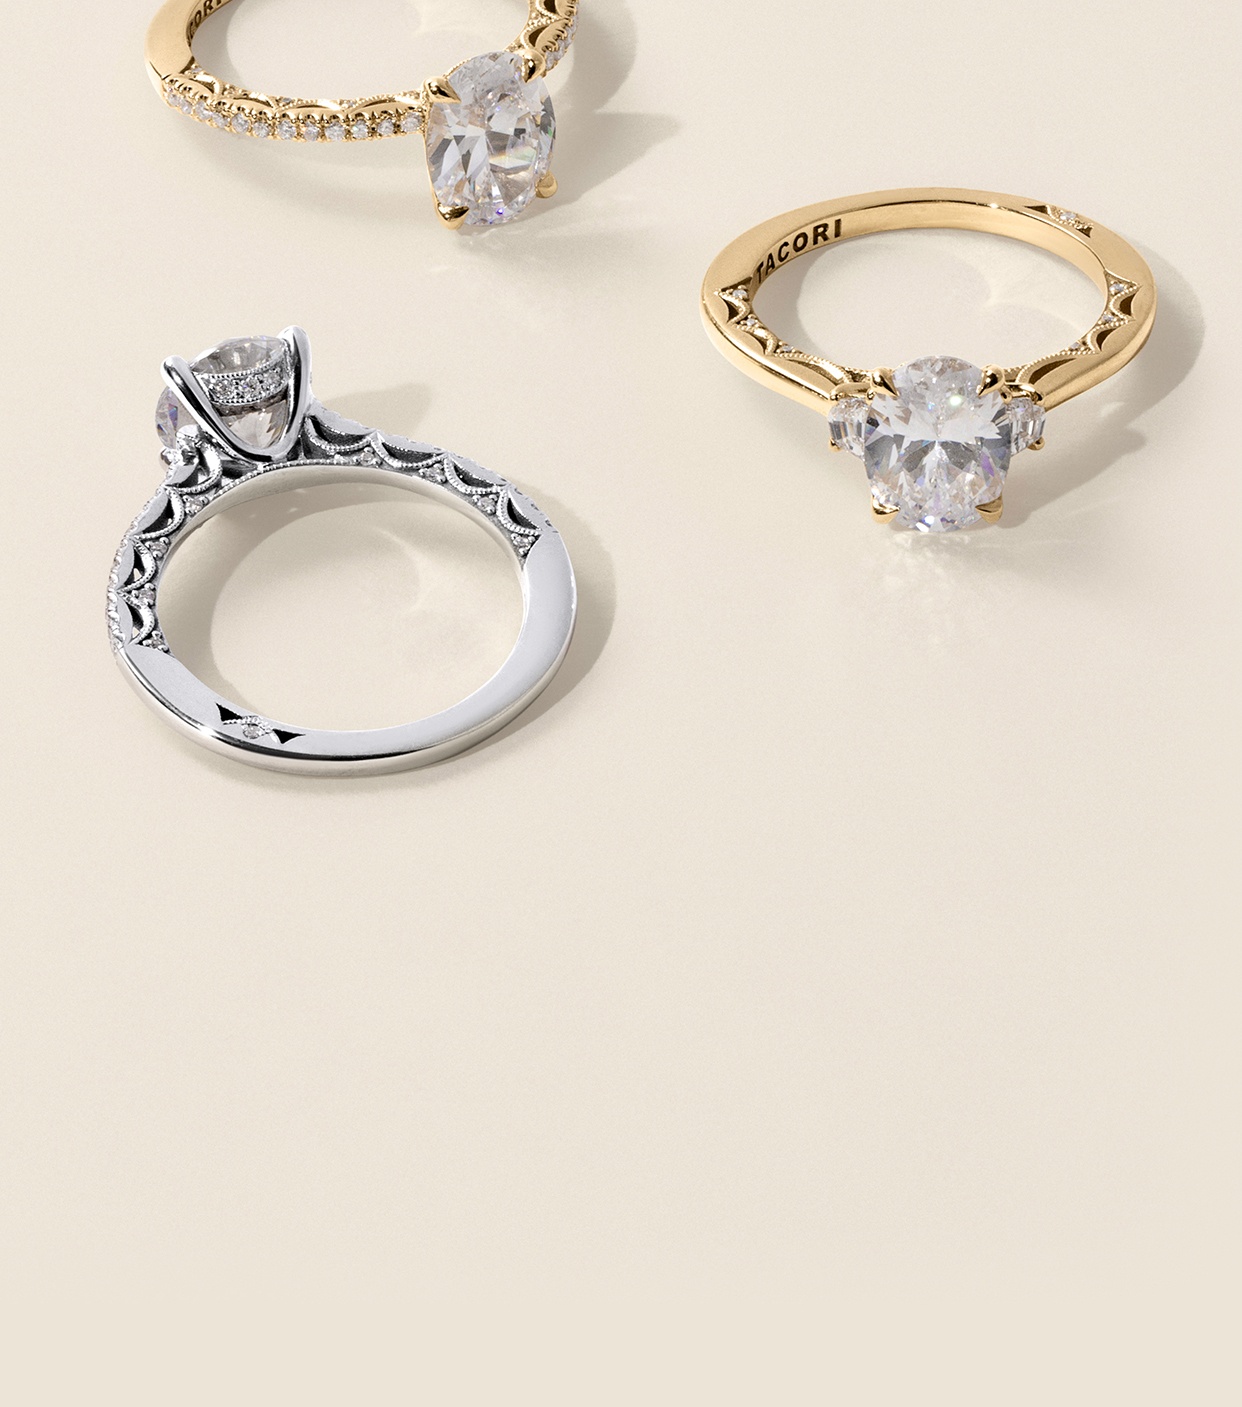 Variety of diamond engagement rings from the Tacori collection.